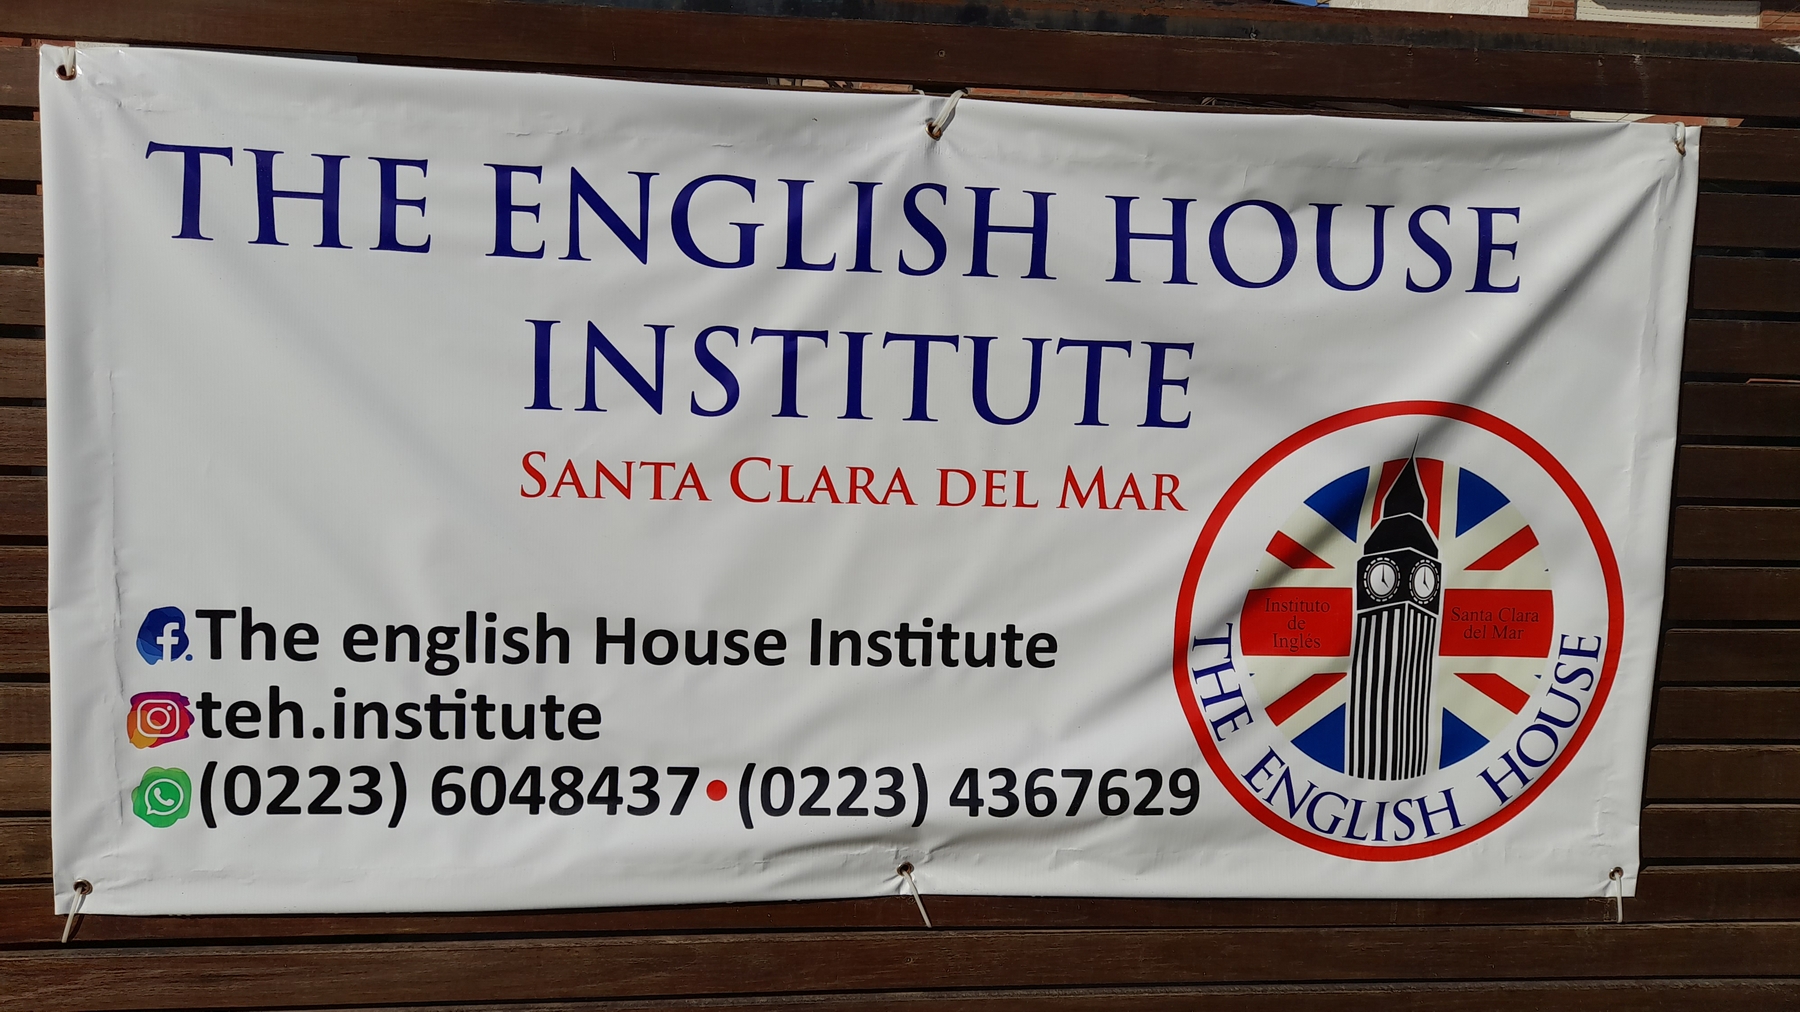 The English House Institute